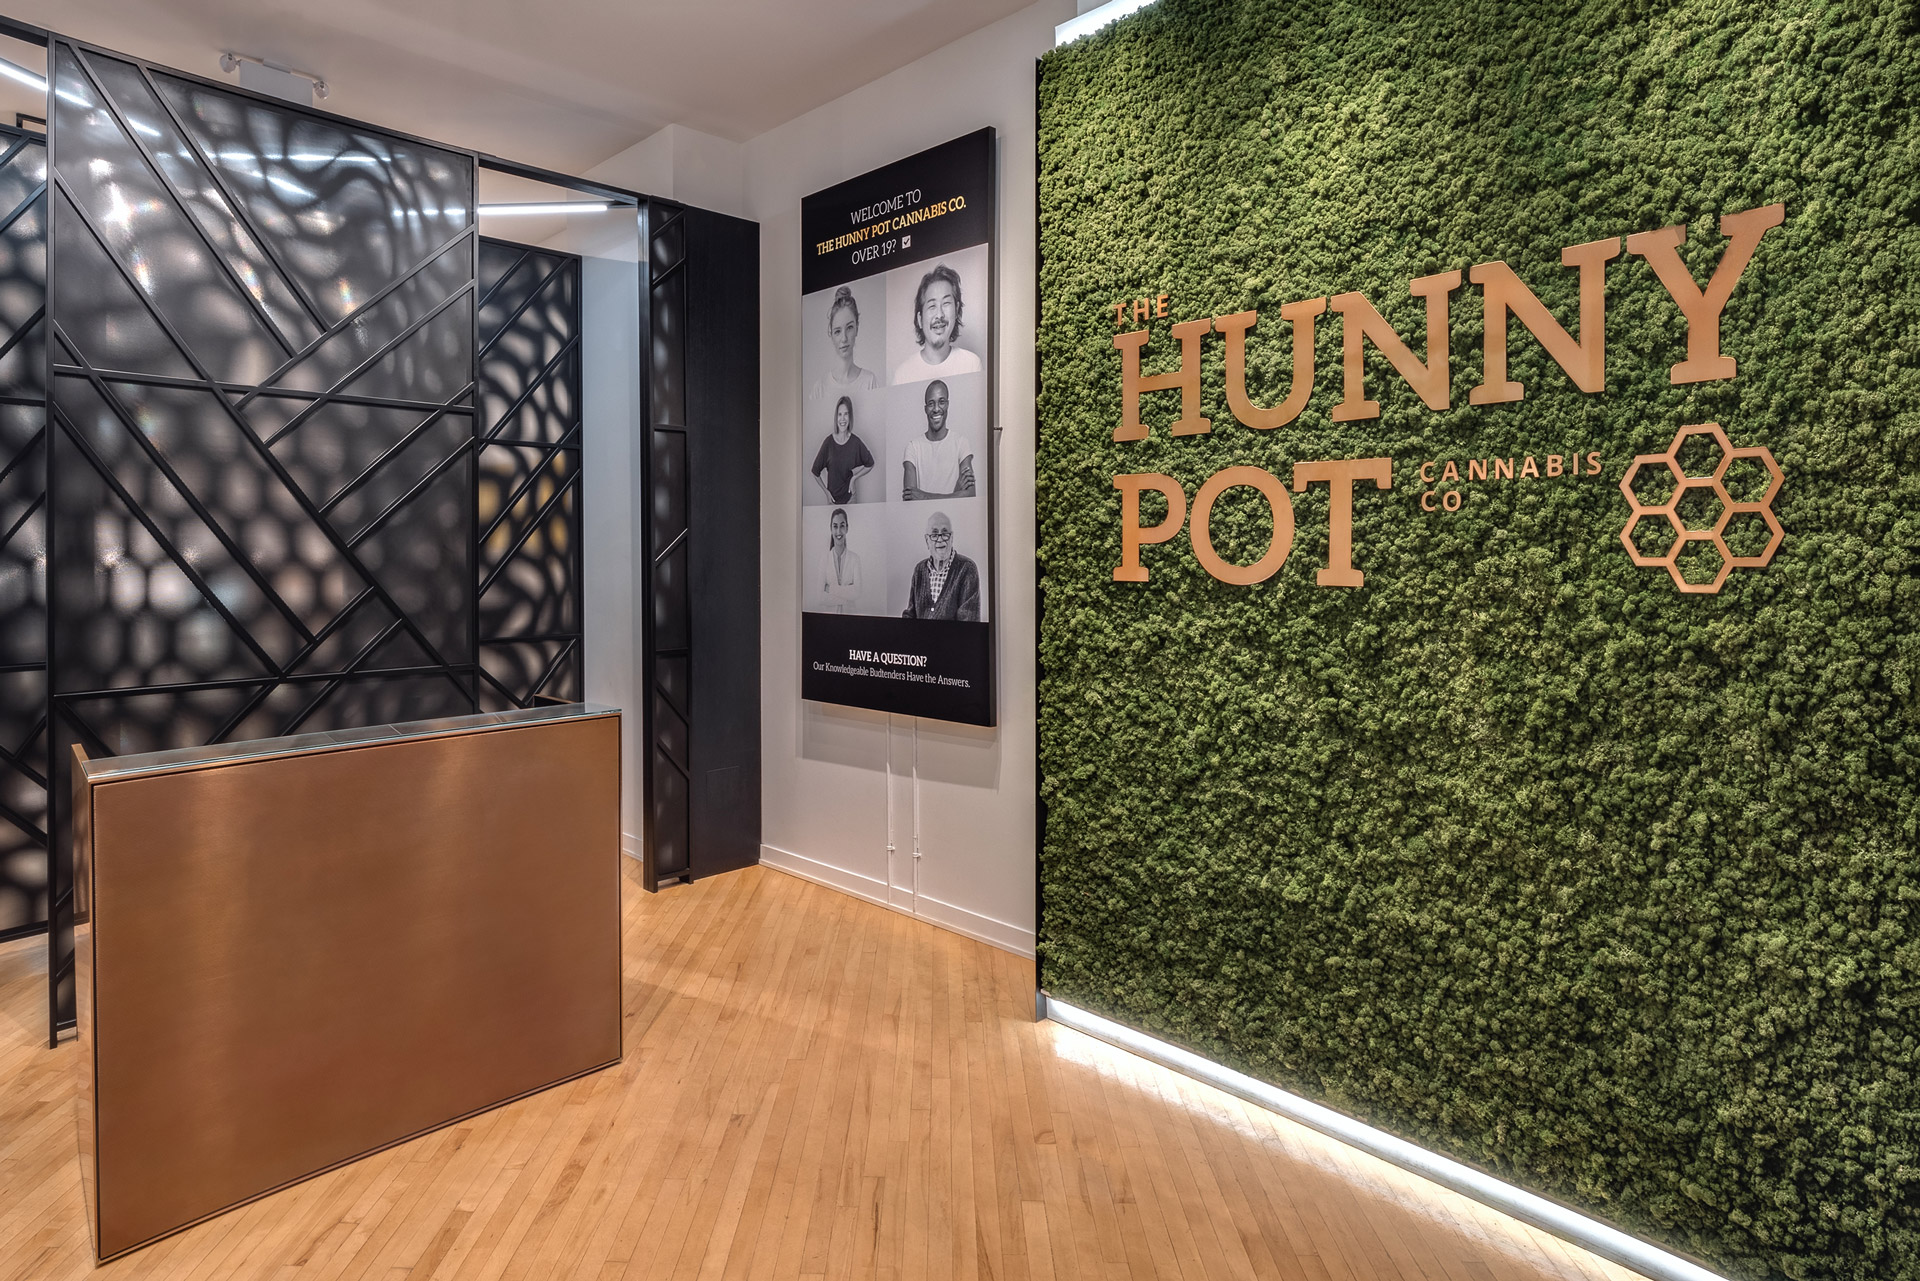 A Look Inside the Hunny Pot, Toronto’s First Legal Cannabis Shop